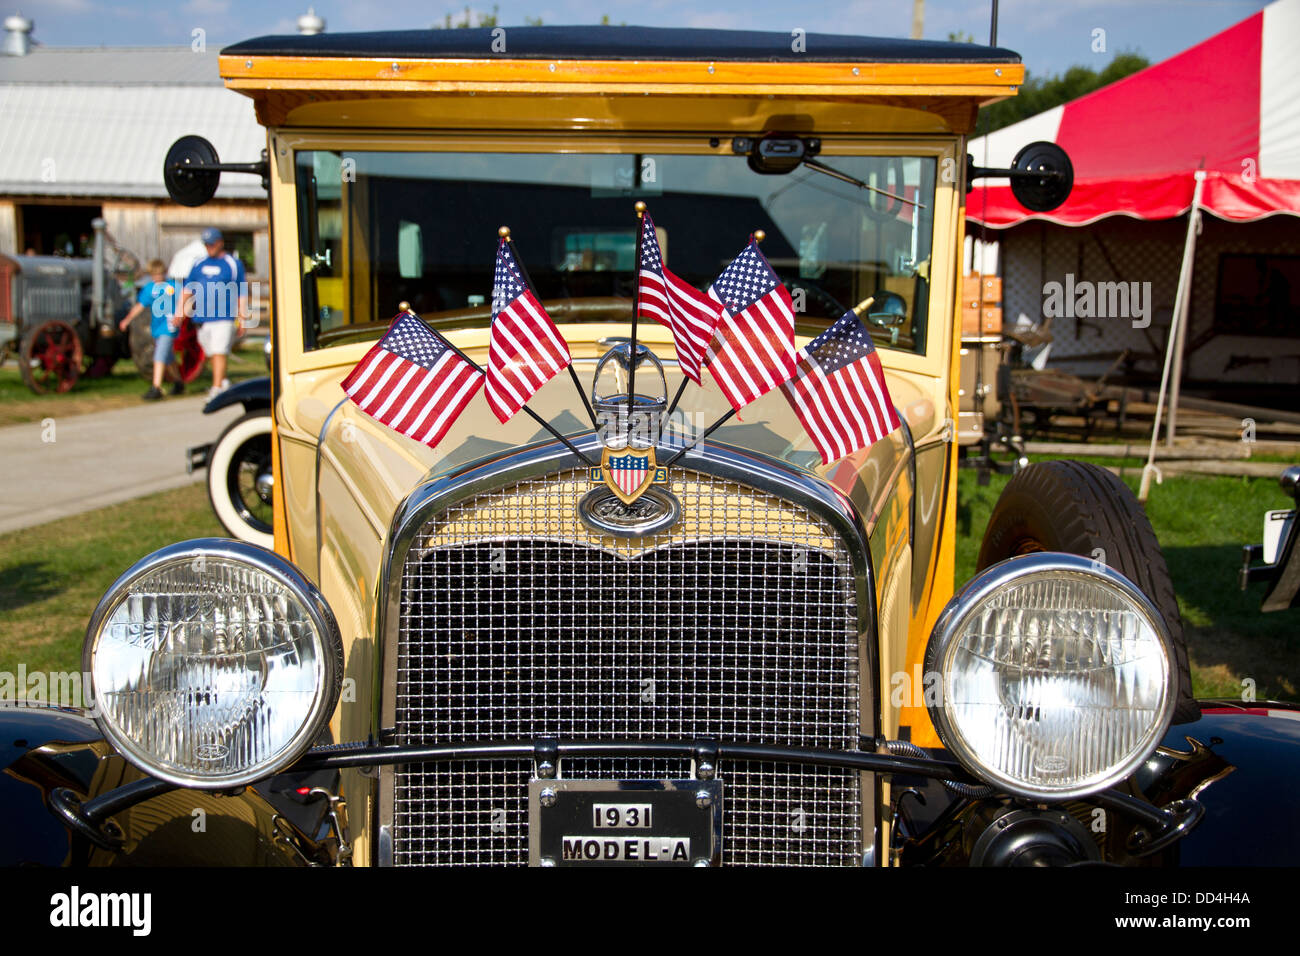 Vintage 1931 Ford Model-A car at the Indiana State Fair, Indianapolis, Indiana, USA Stock Photo